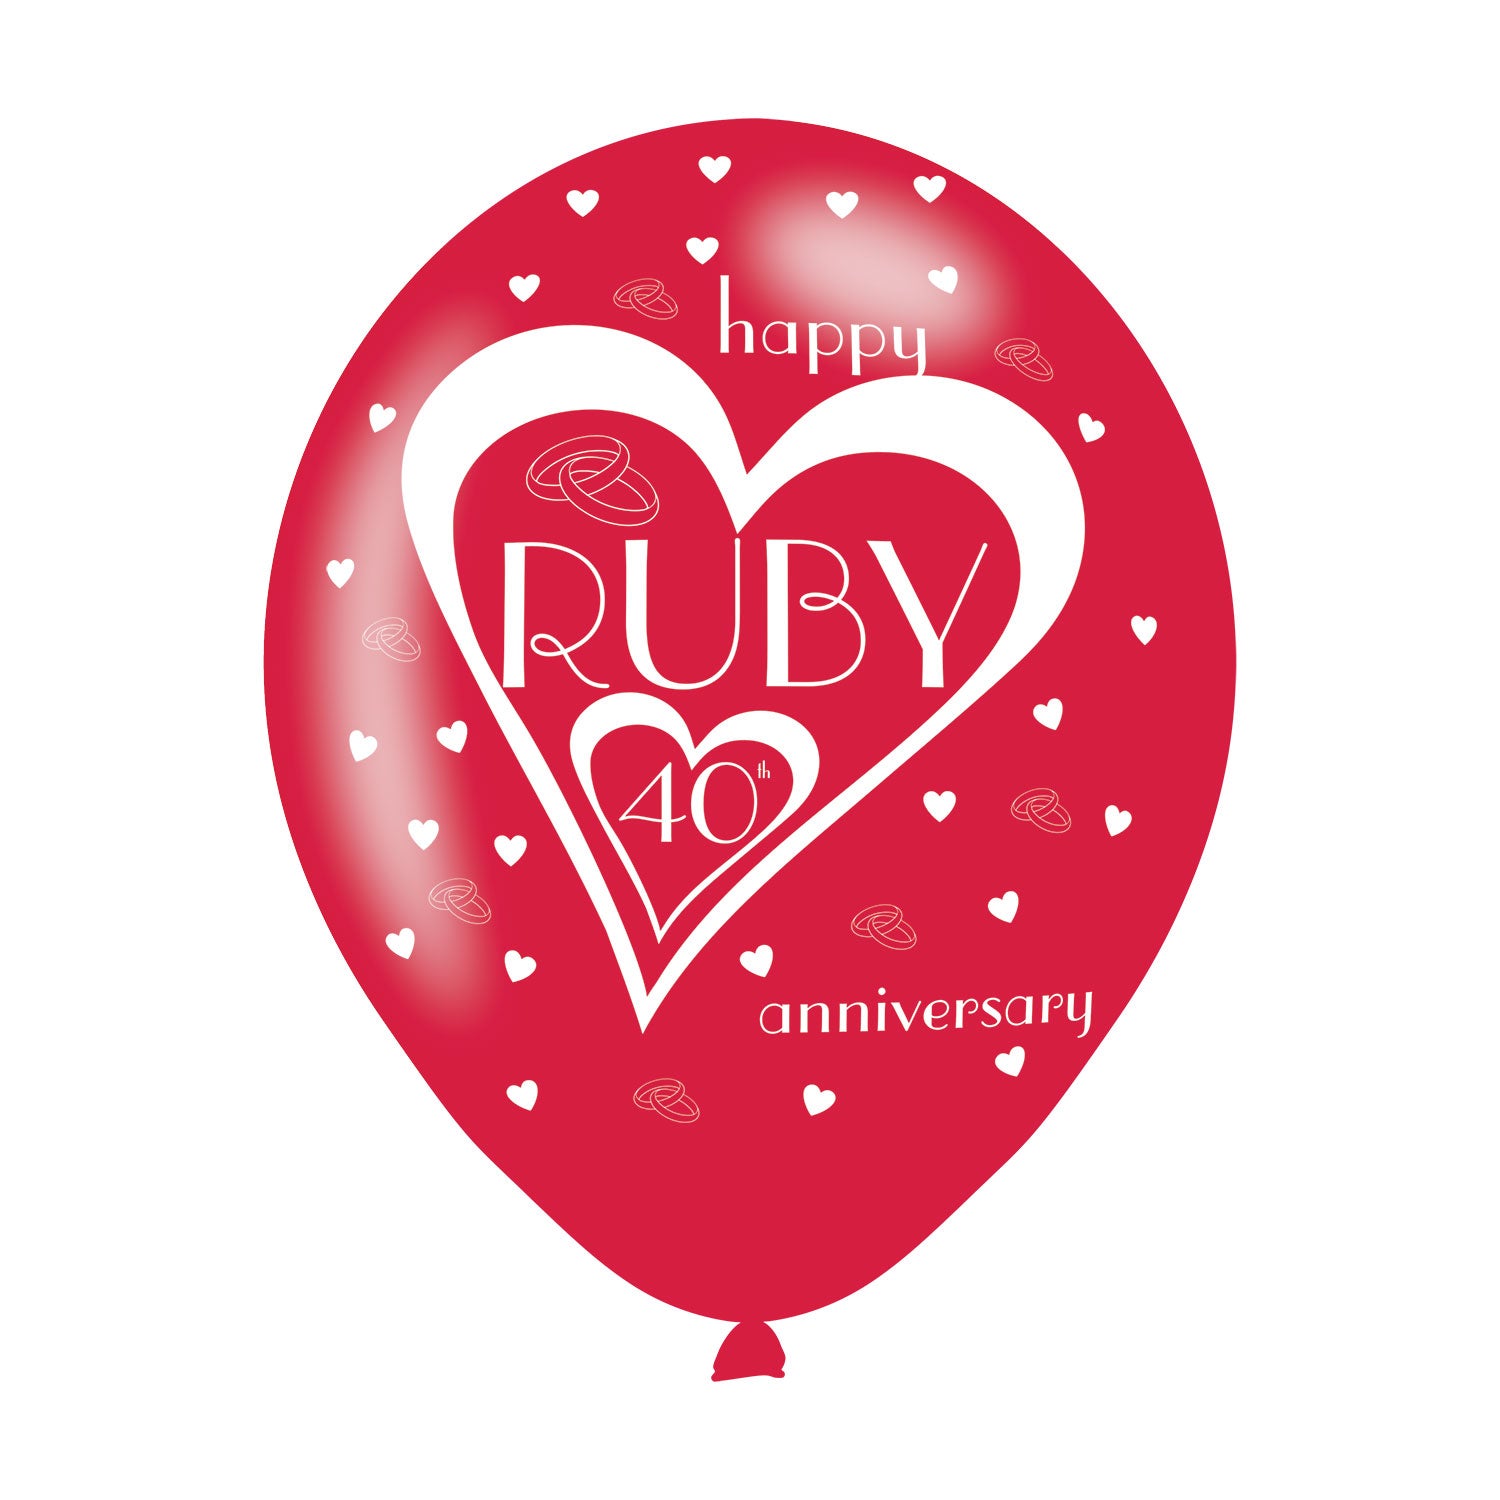 40th Ruby Anniversary Latex Balloons. Will inflate up to 27cm. Suitable for Air fill or Helium fill.